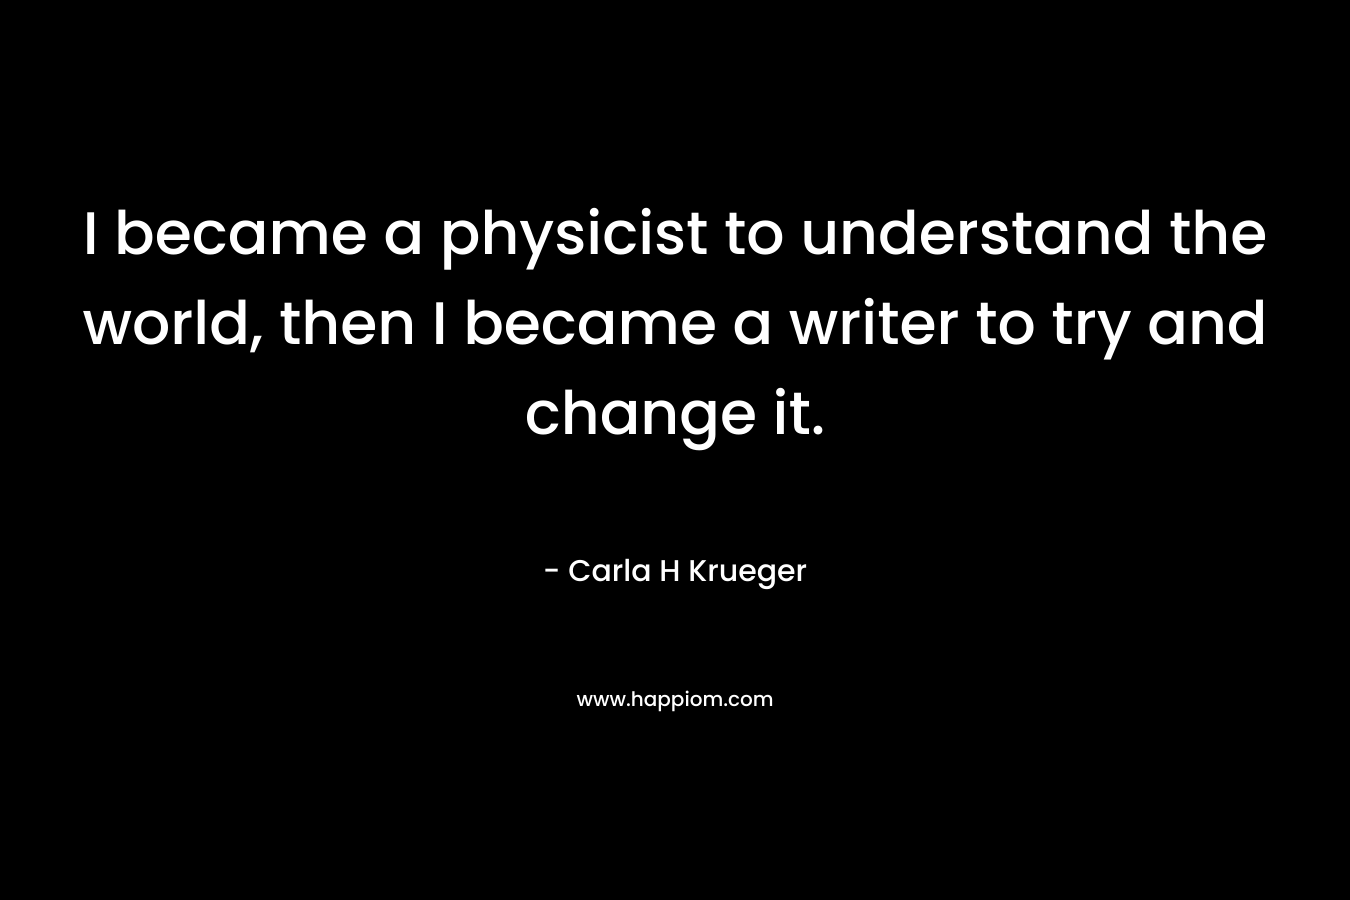 I became a physicist to understand the world, then I became a writer to try and change it.